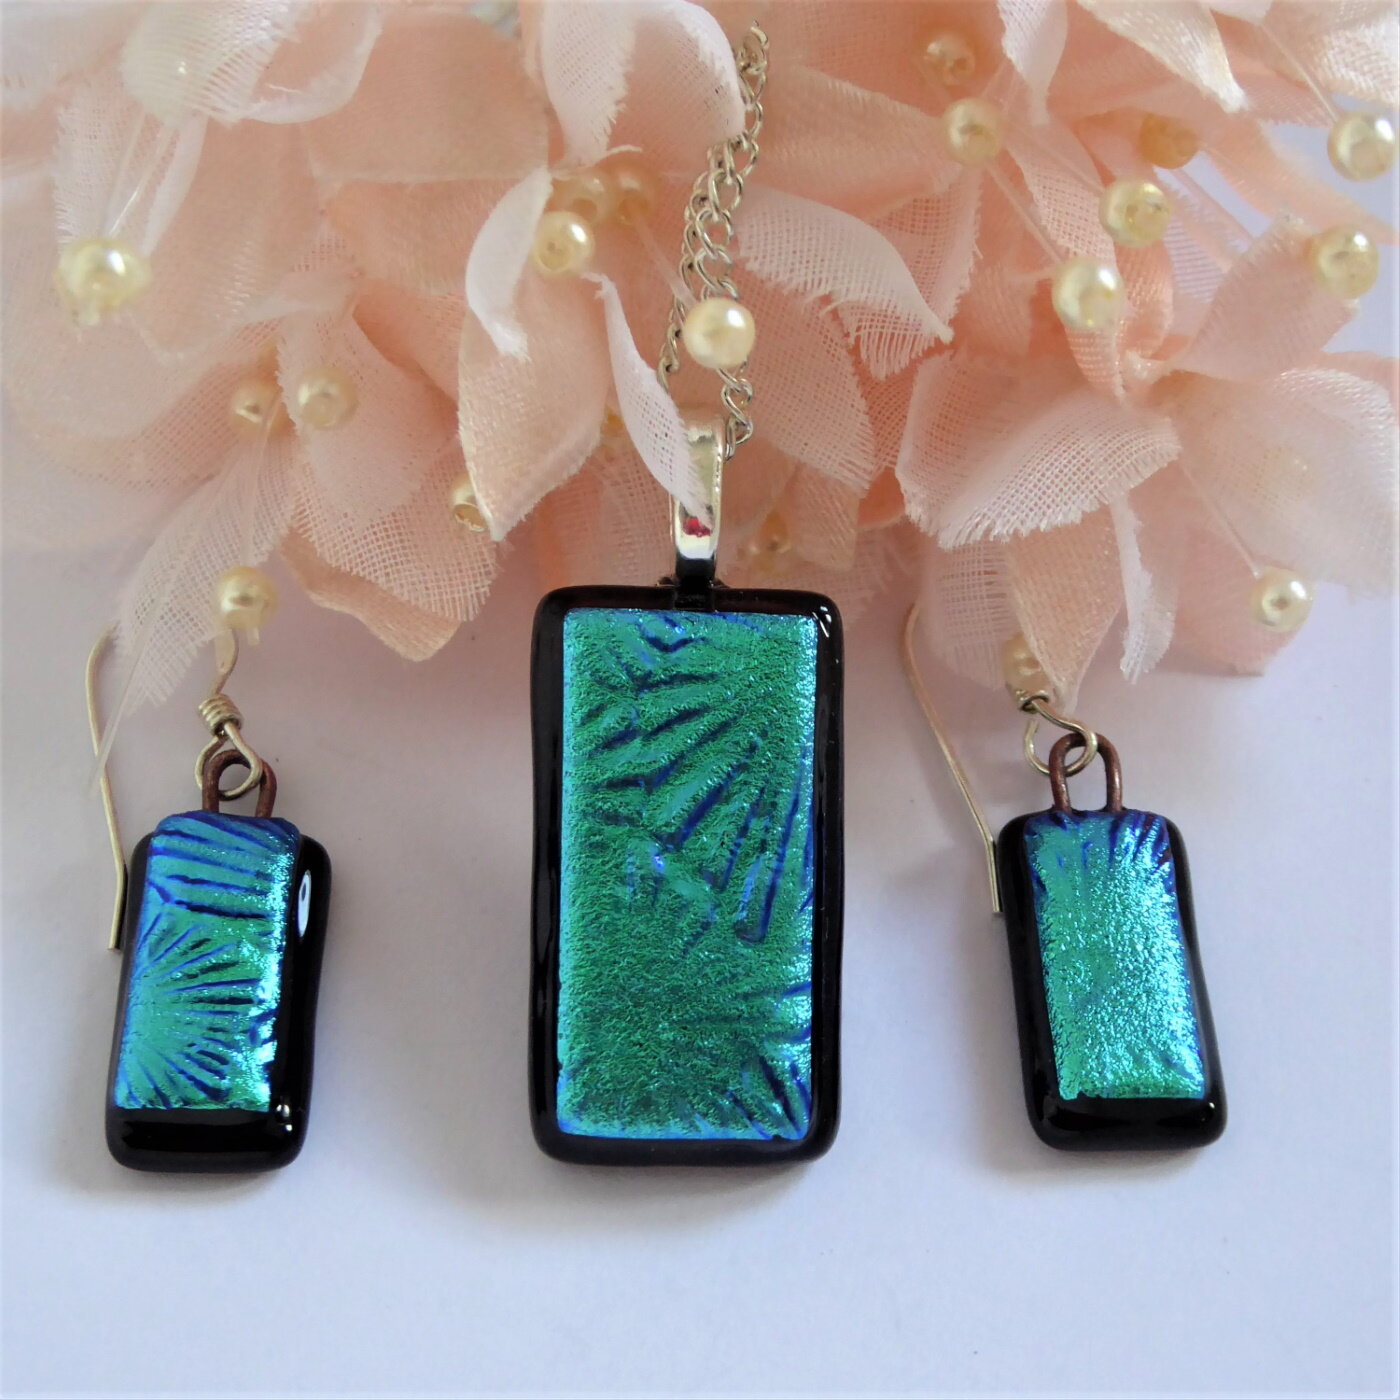 Florentine pendant and earrings in teal